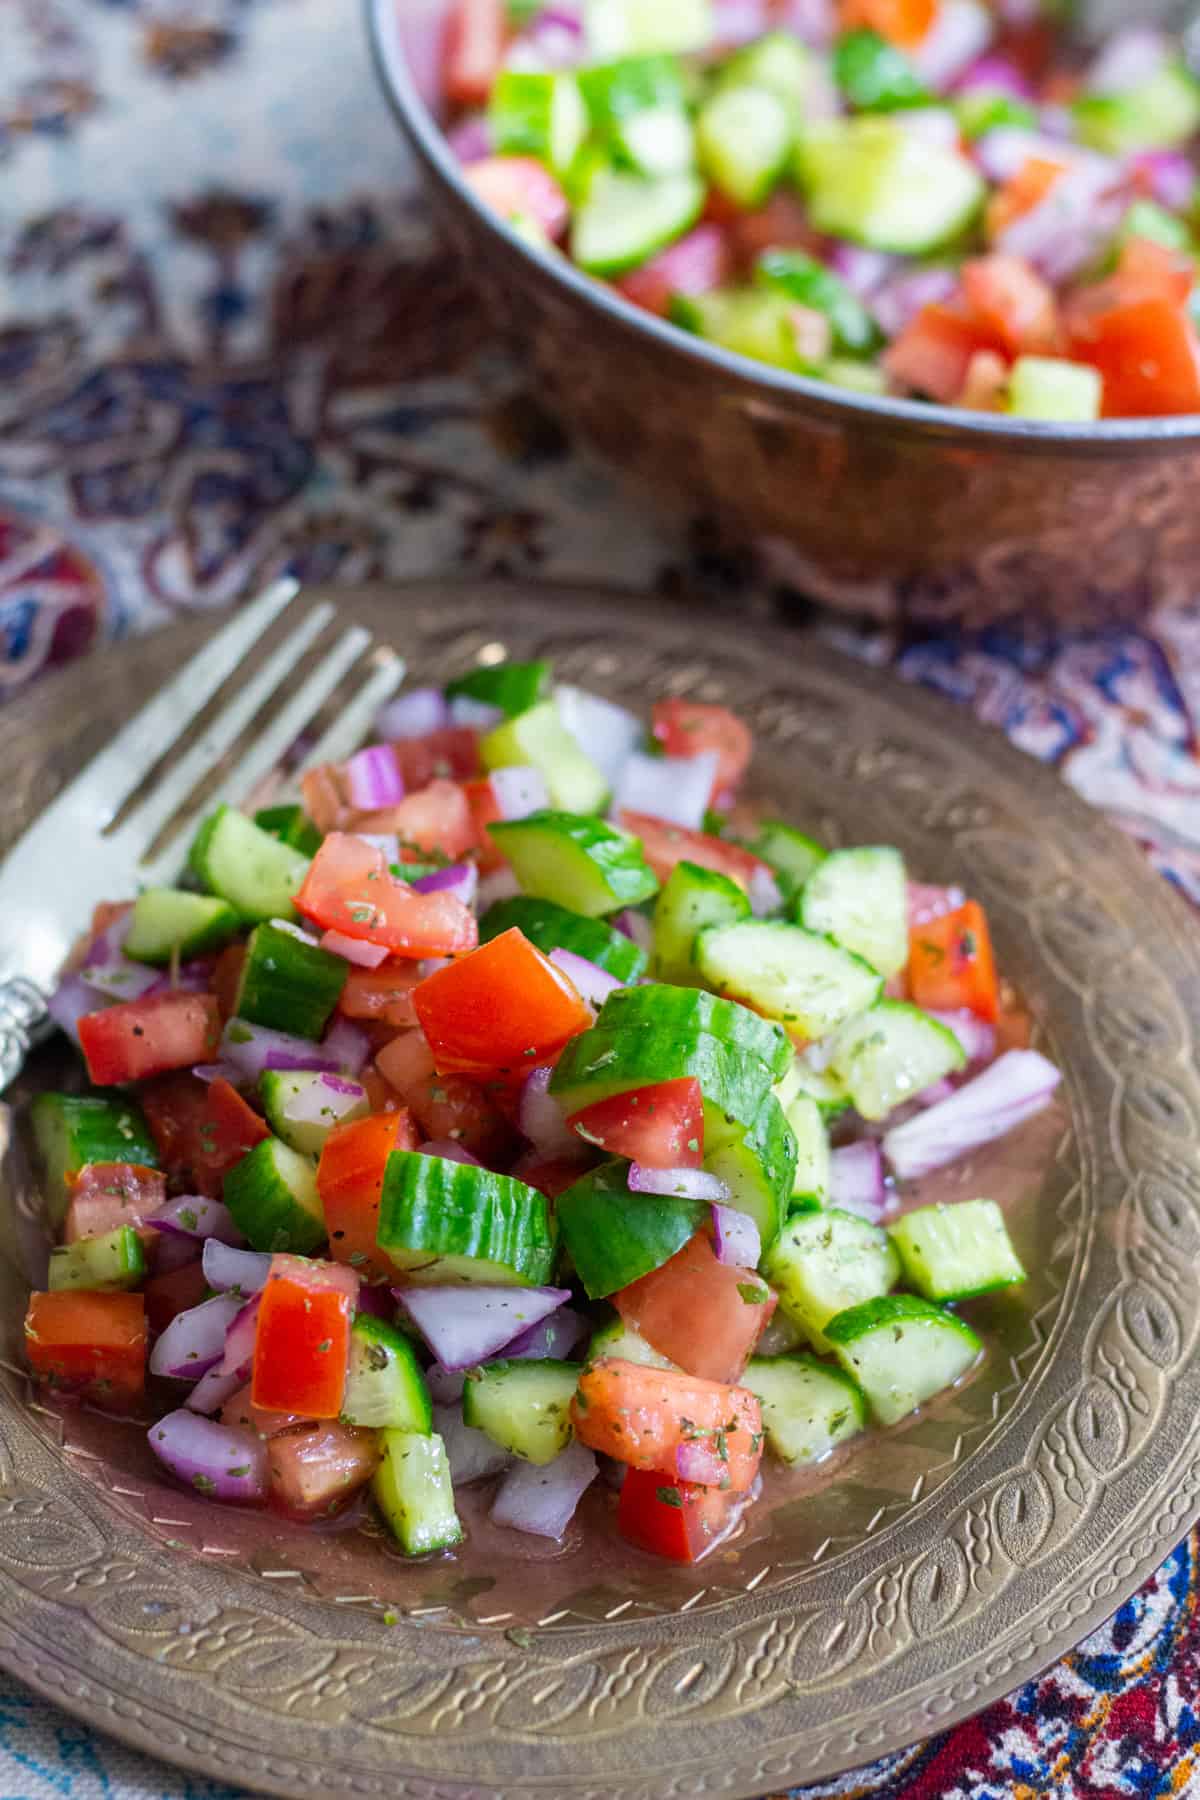 Salad Shirazi is a light and easy Persian salad that is a delicious alternative to the usual side dishes. It's refreshing, healthy and easy.